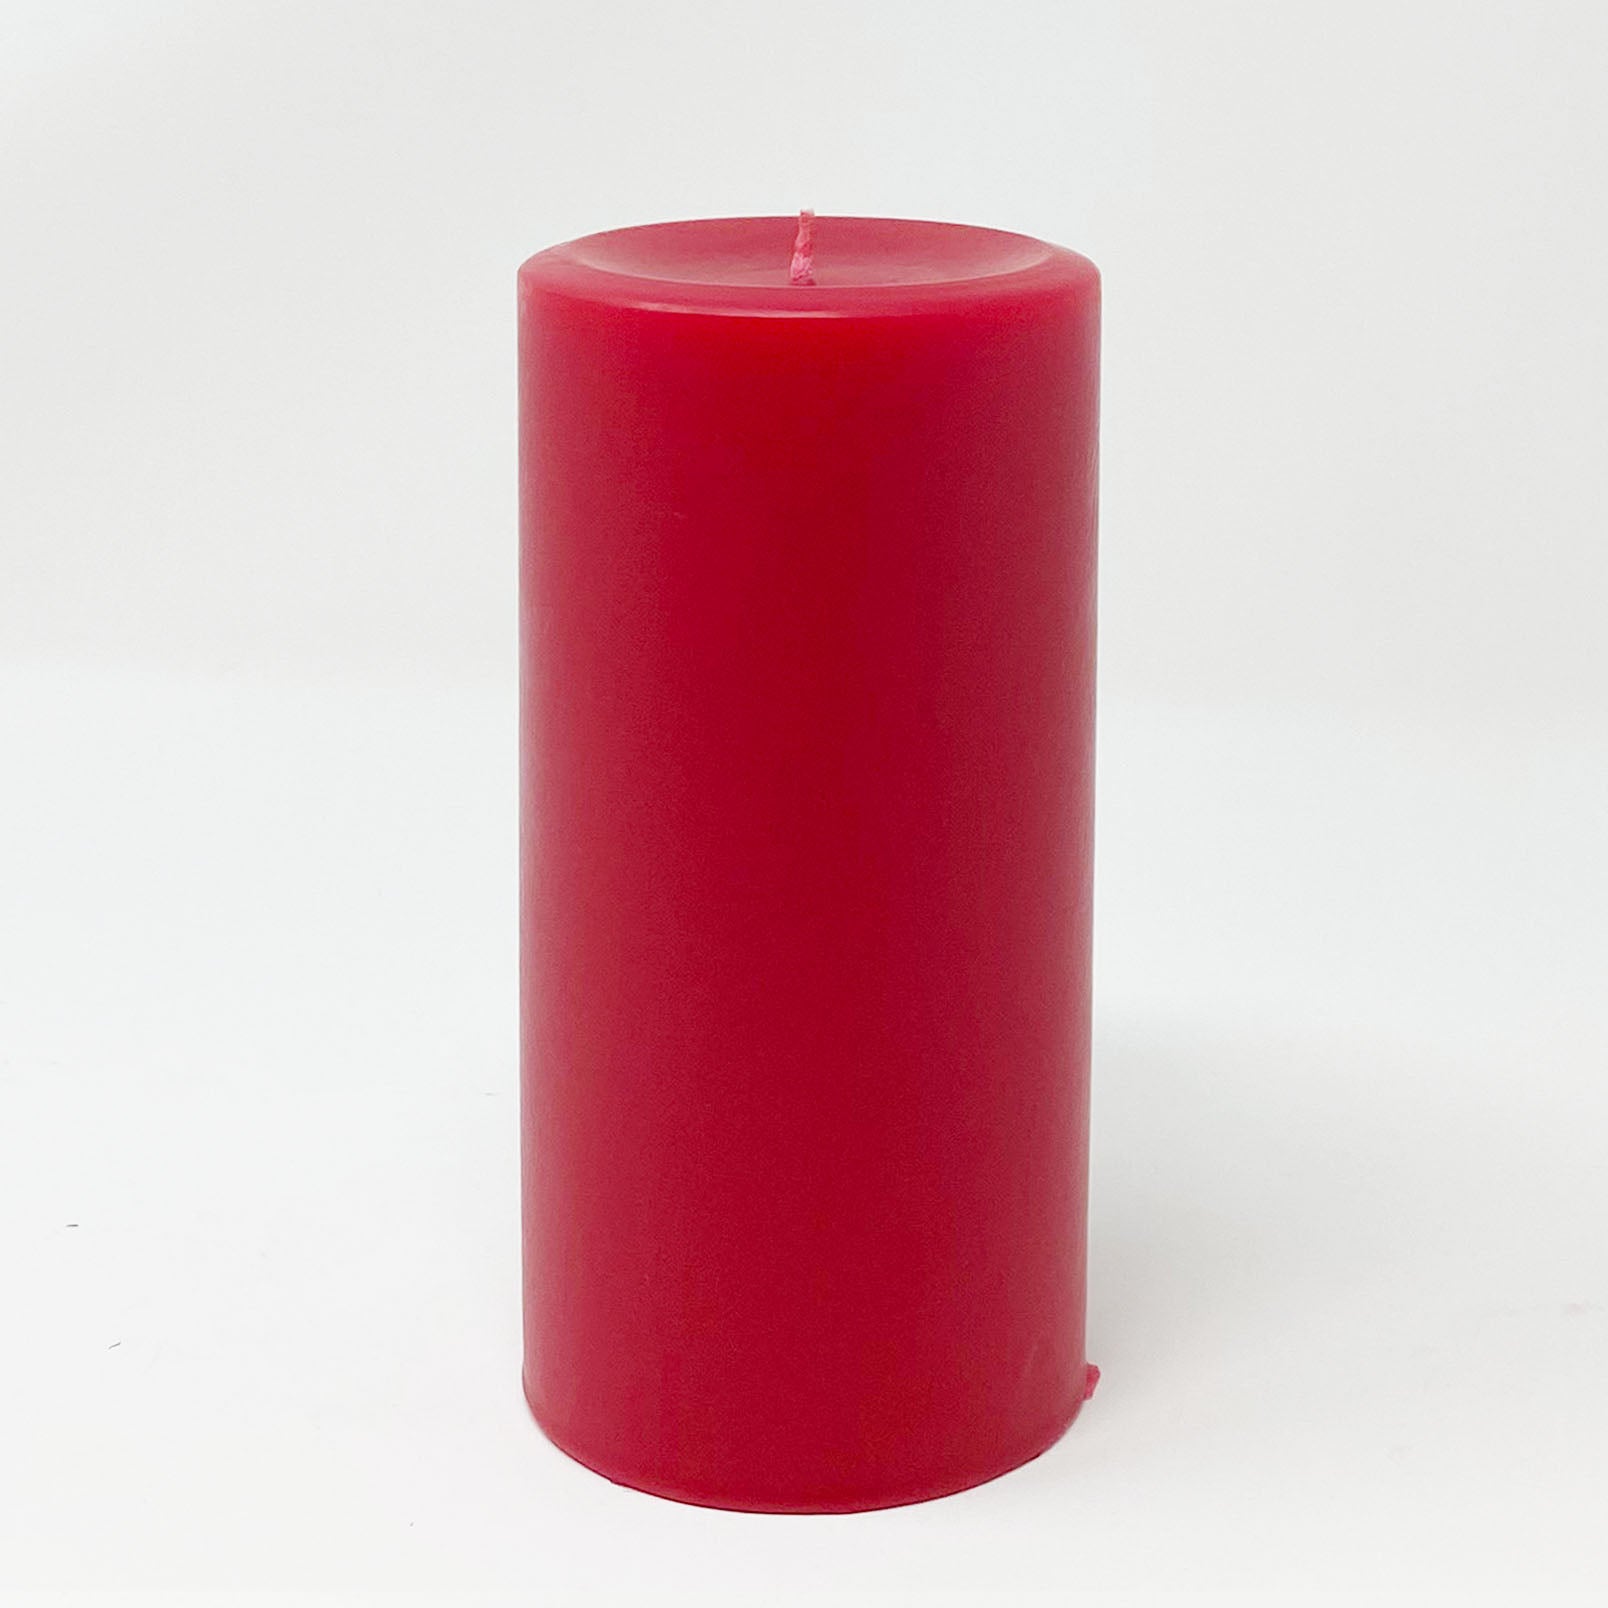 3x6" Sweetheart Red Pillar Candle